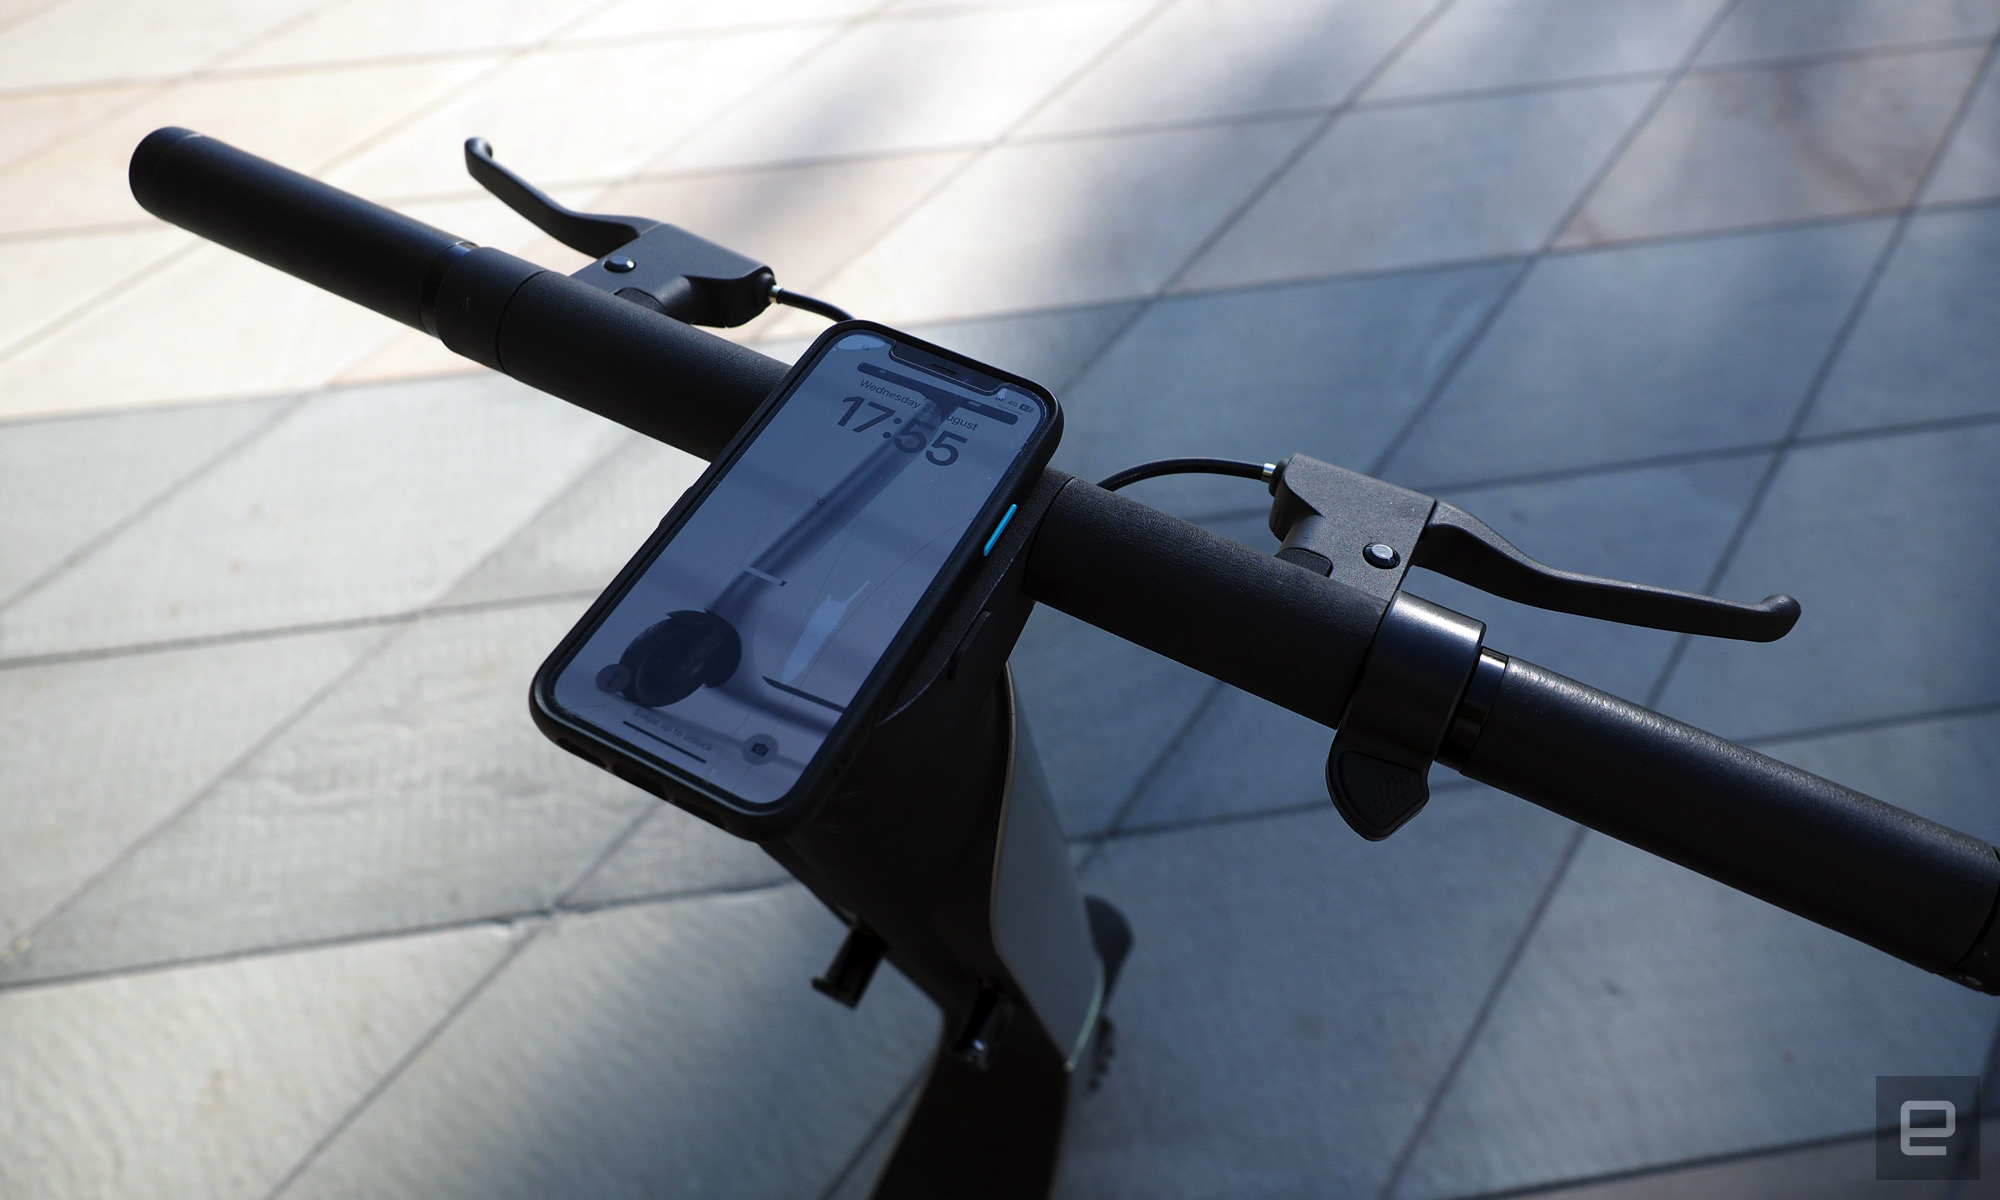 Image of a Bo M's handlebars and brake levers with an iPhone mounted in the middle.